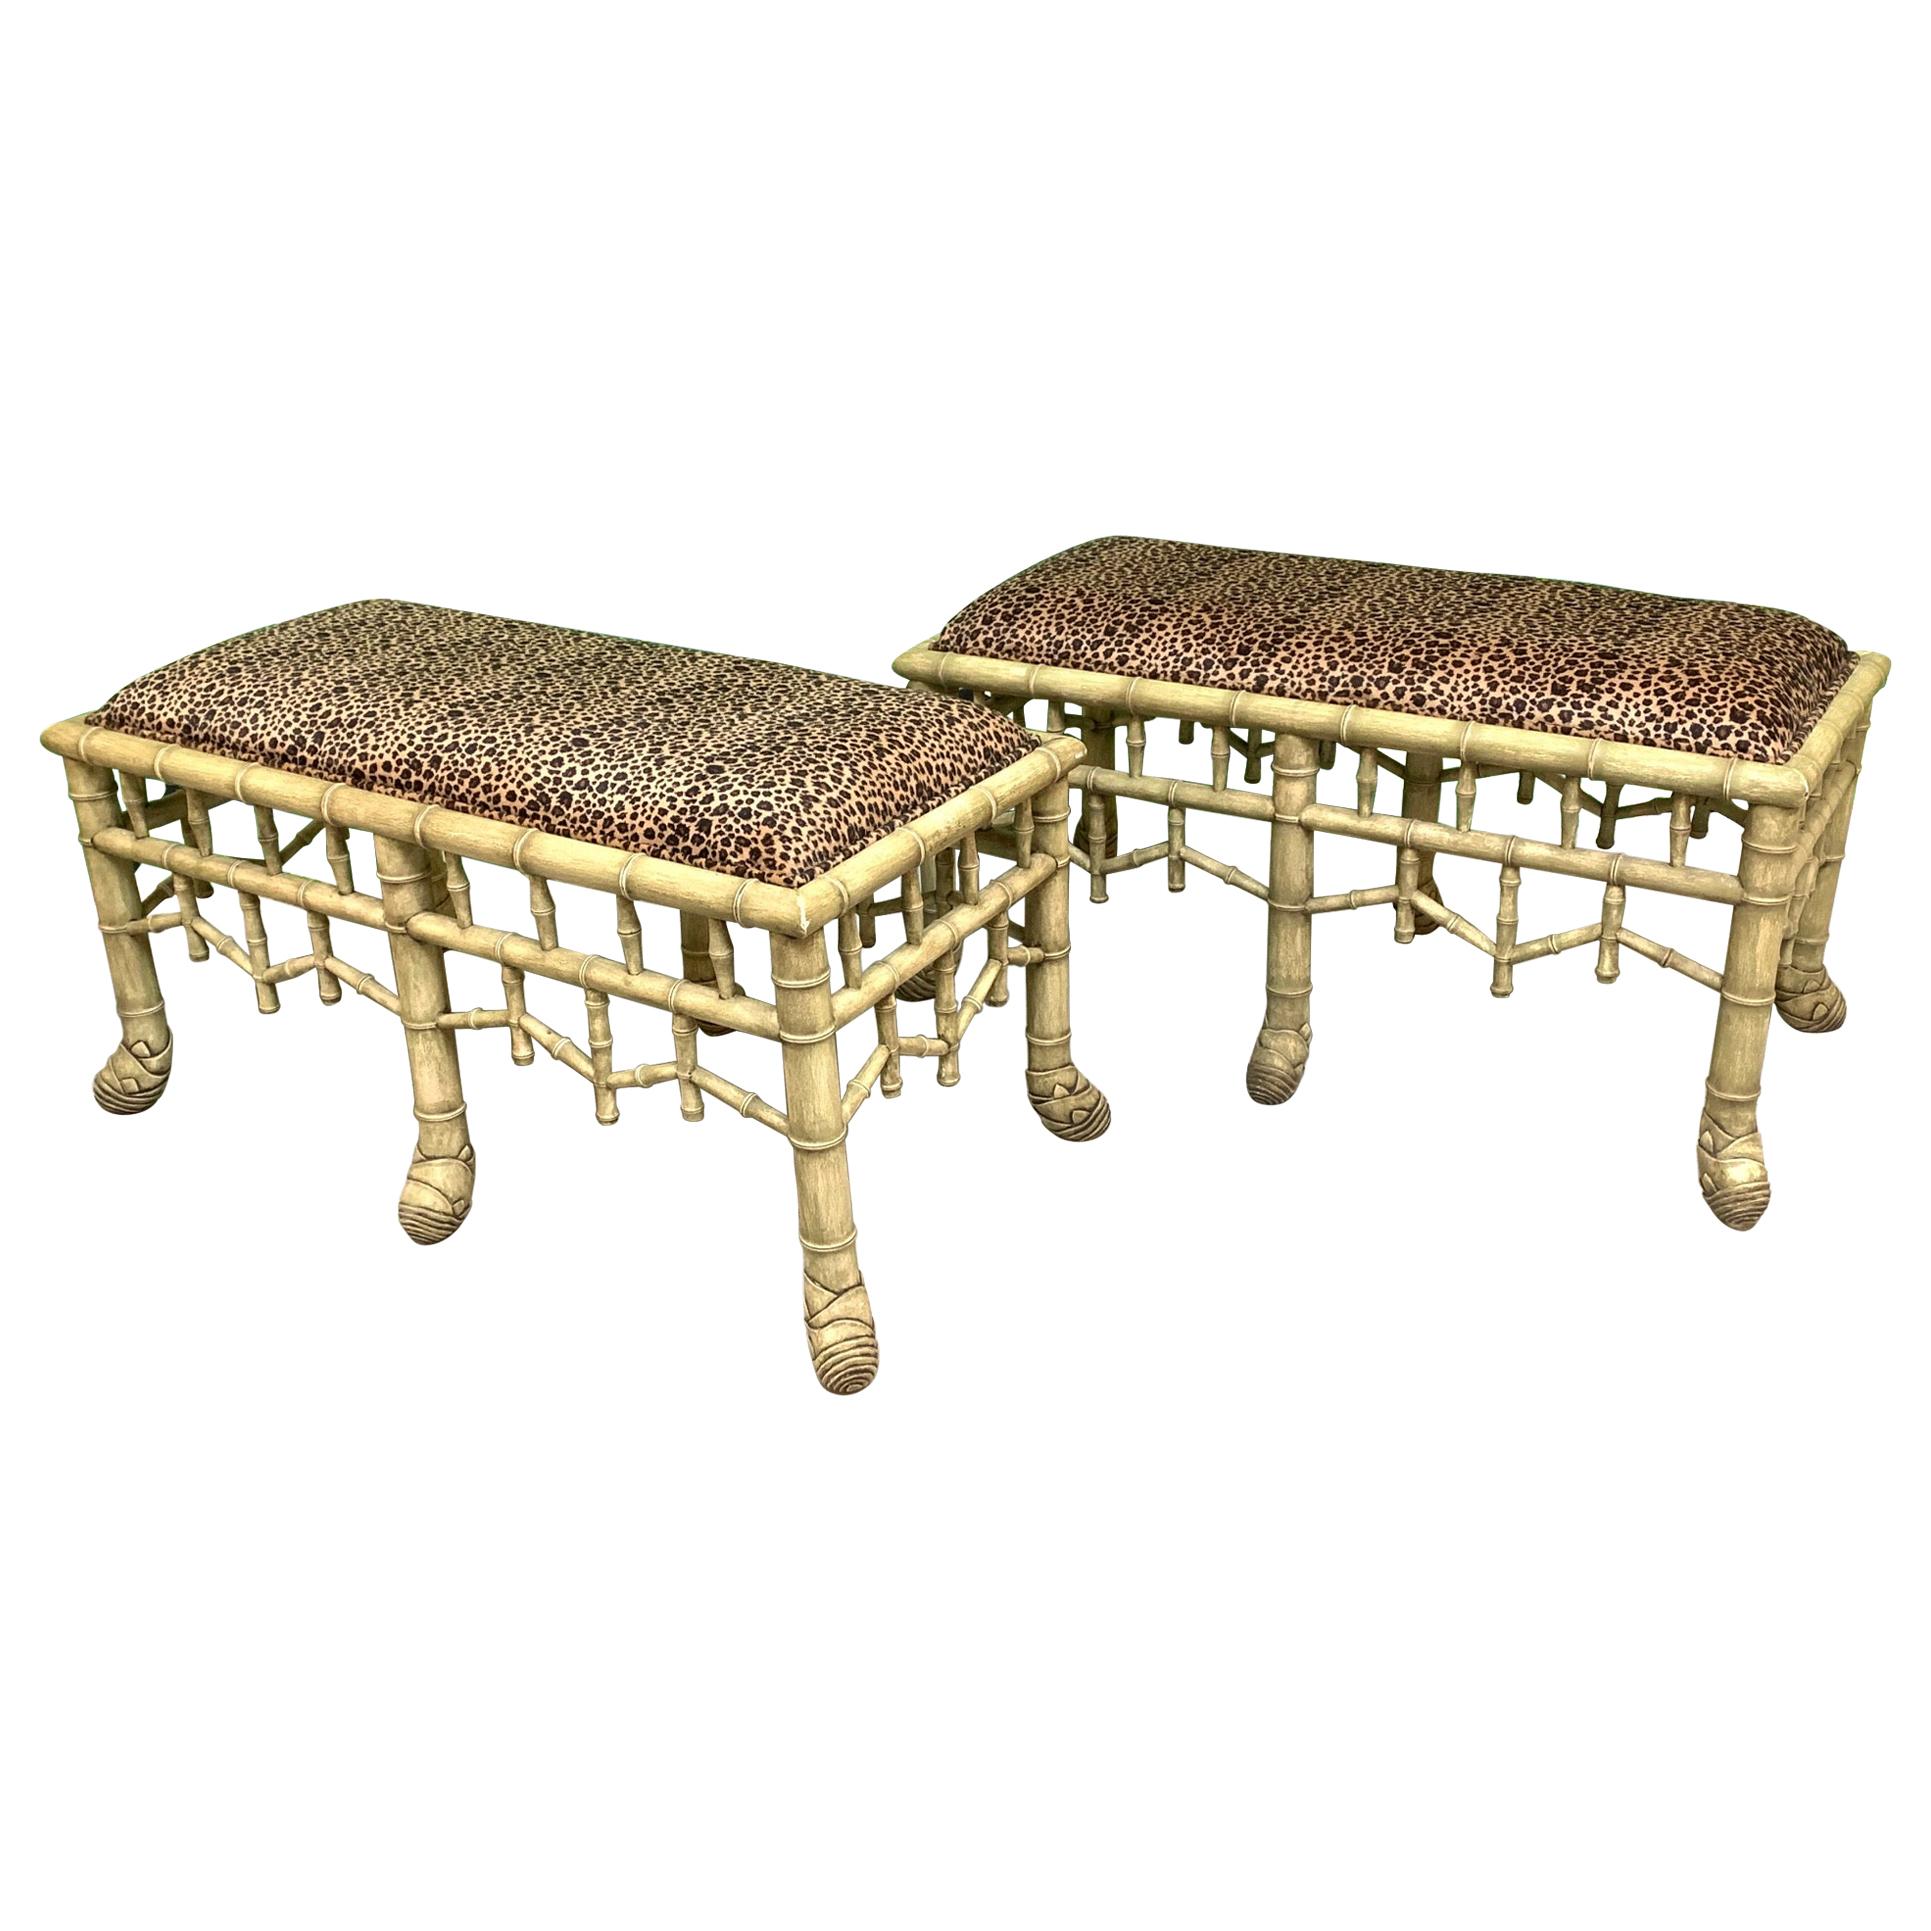 Faux Bamboo Pavilion Style Bench, A Pair